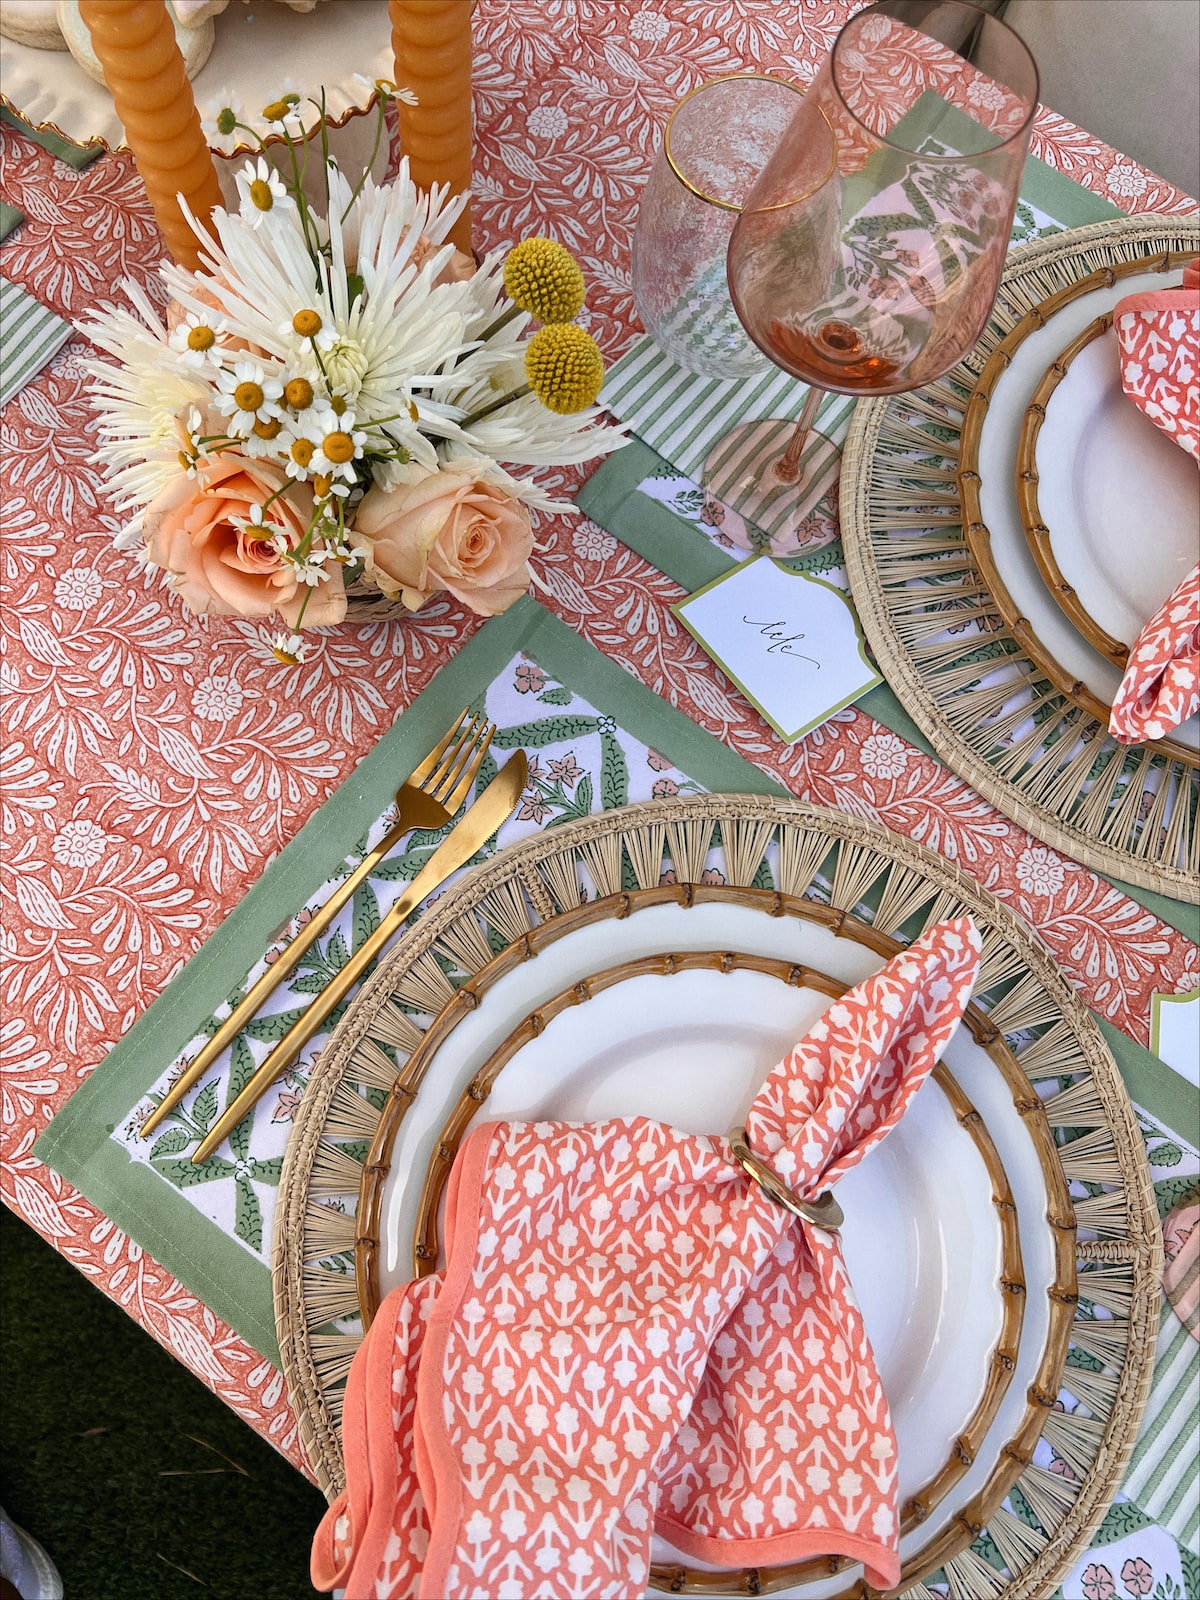 Brighton Butler spring tablescape, coral and green table setting, Amanda lindroth tablecloth, juliska bamboo dinner plates, Estelle wine glasses, gold silverware